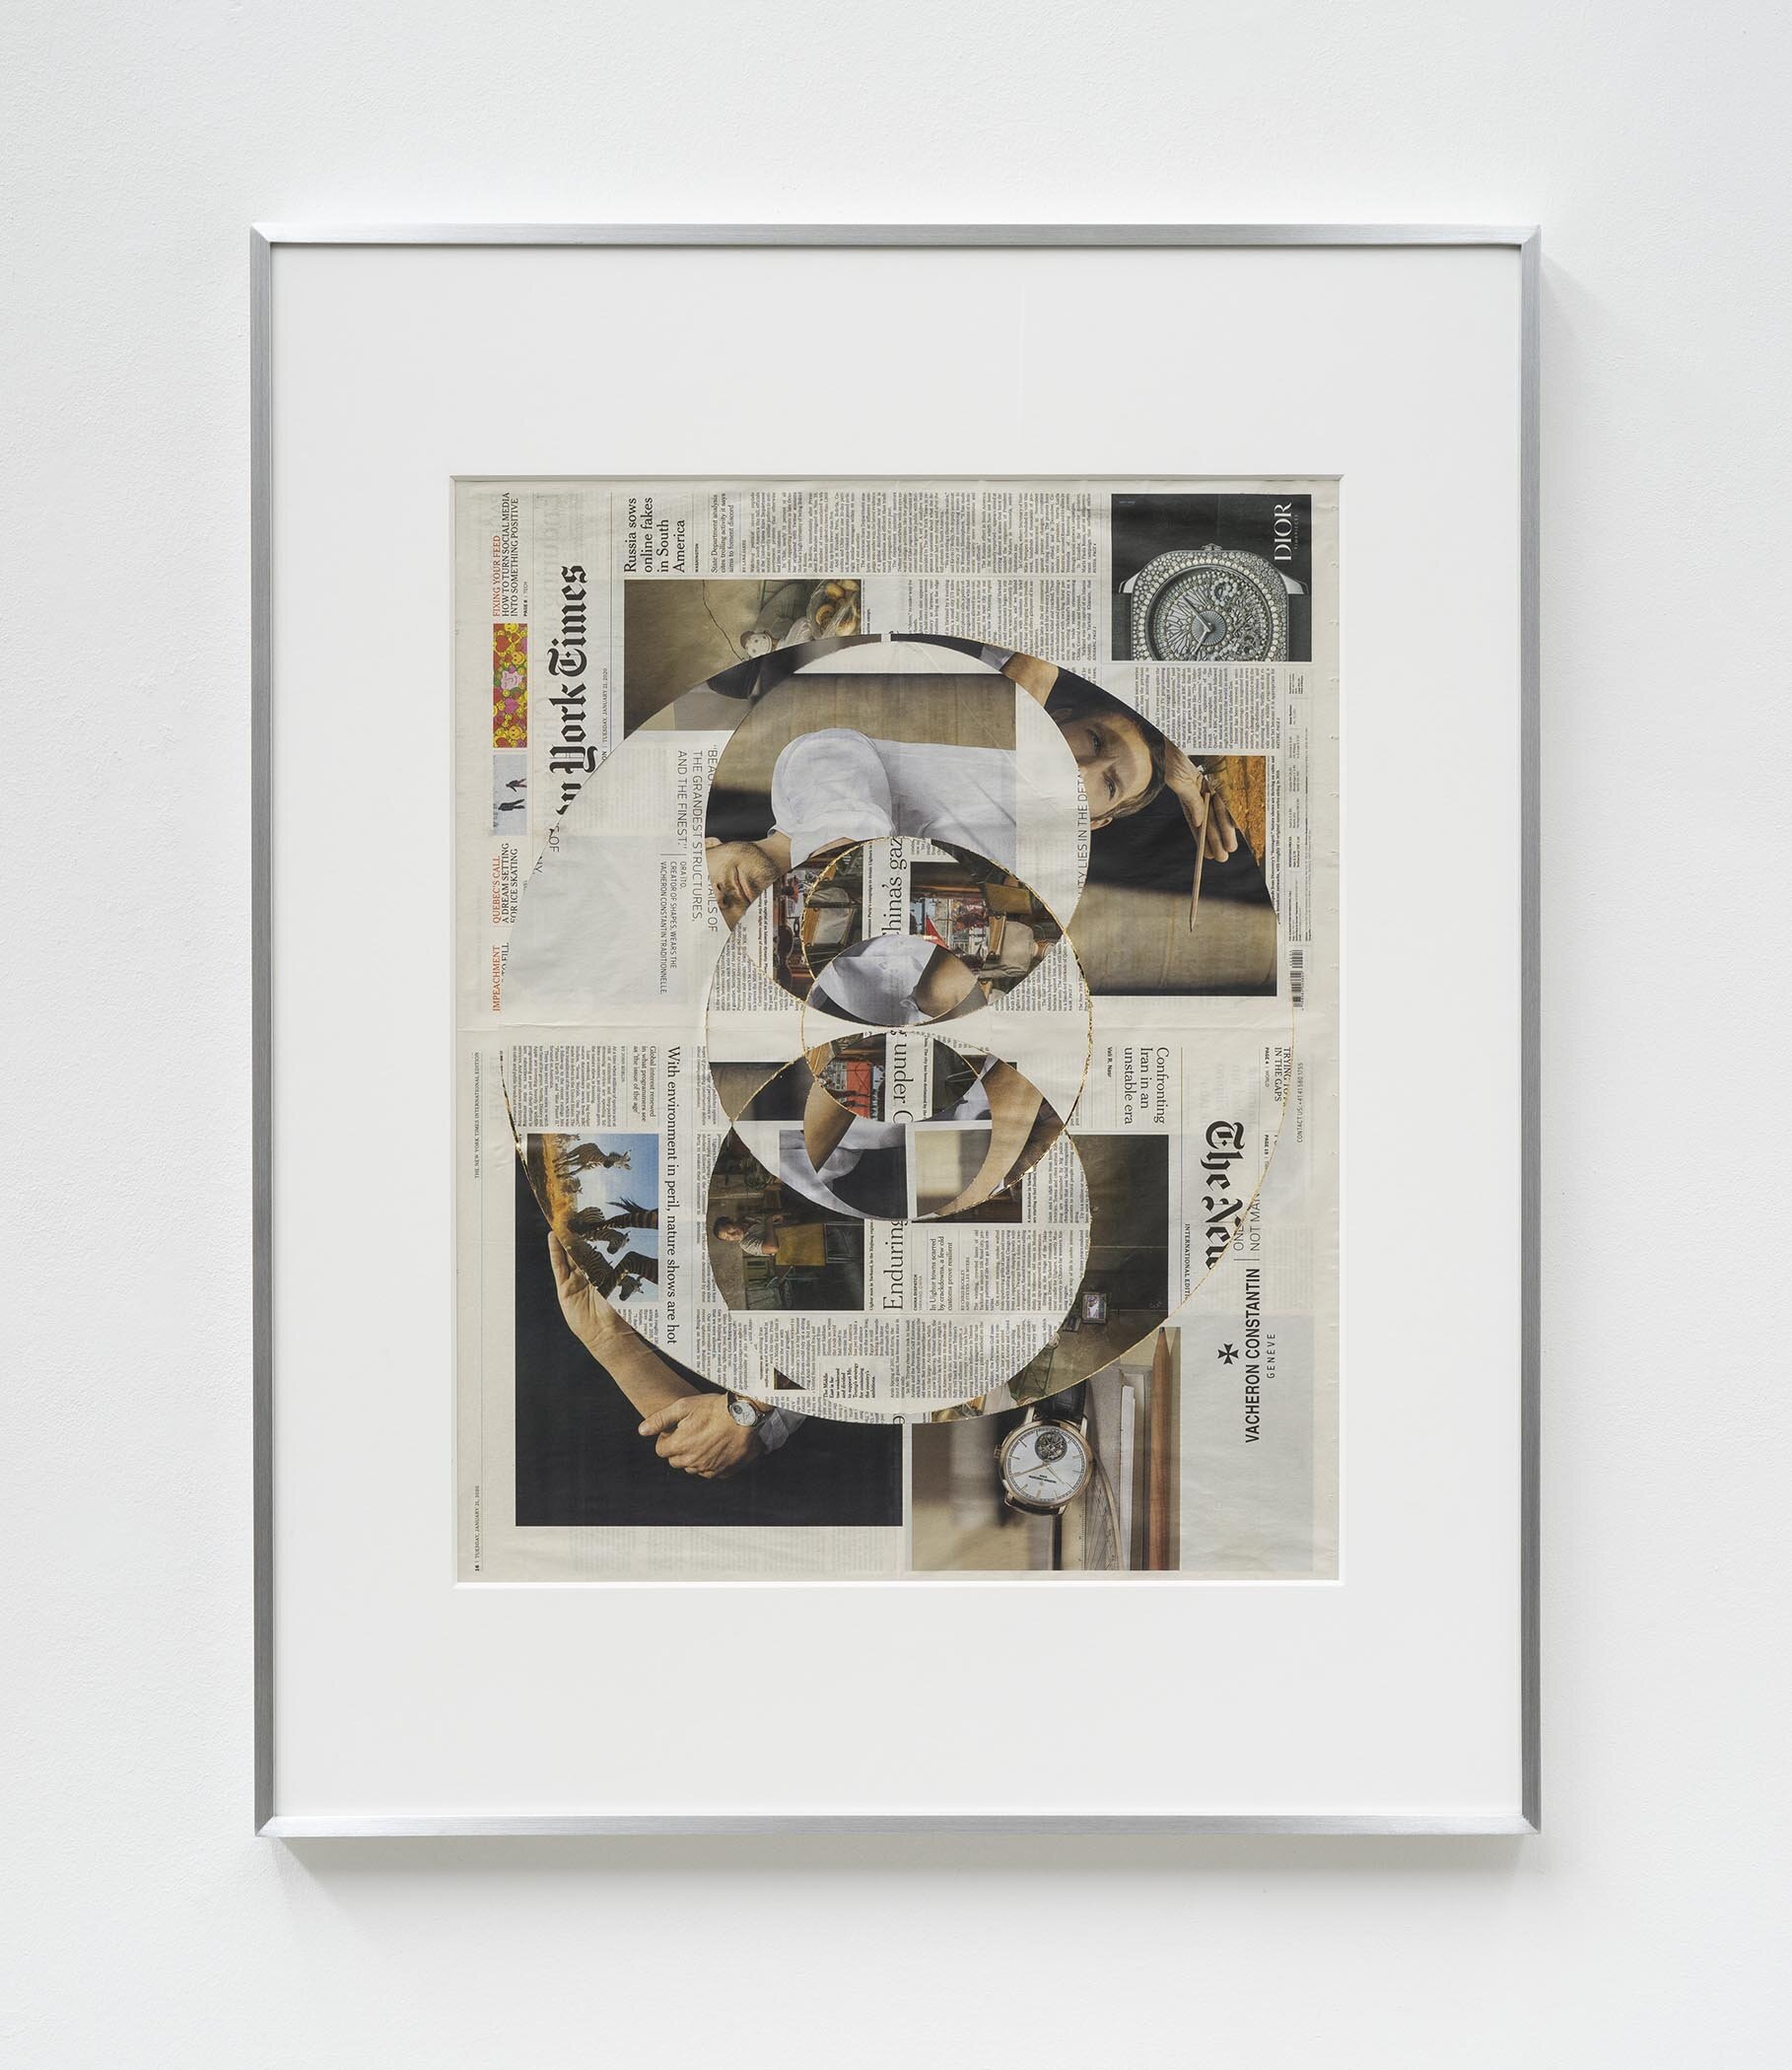   Blind Collage (Three 180º Rotations, The New York Times, January 21, 2020)    2020   Newspaper, tape, and 22 karat gold leaf  39 1/8 x 31 1/4 inches  Exhibition:  Standard Deviations, 2020  